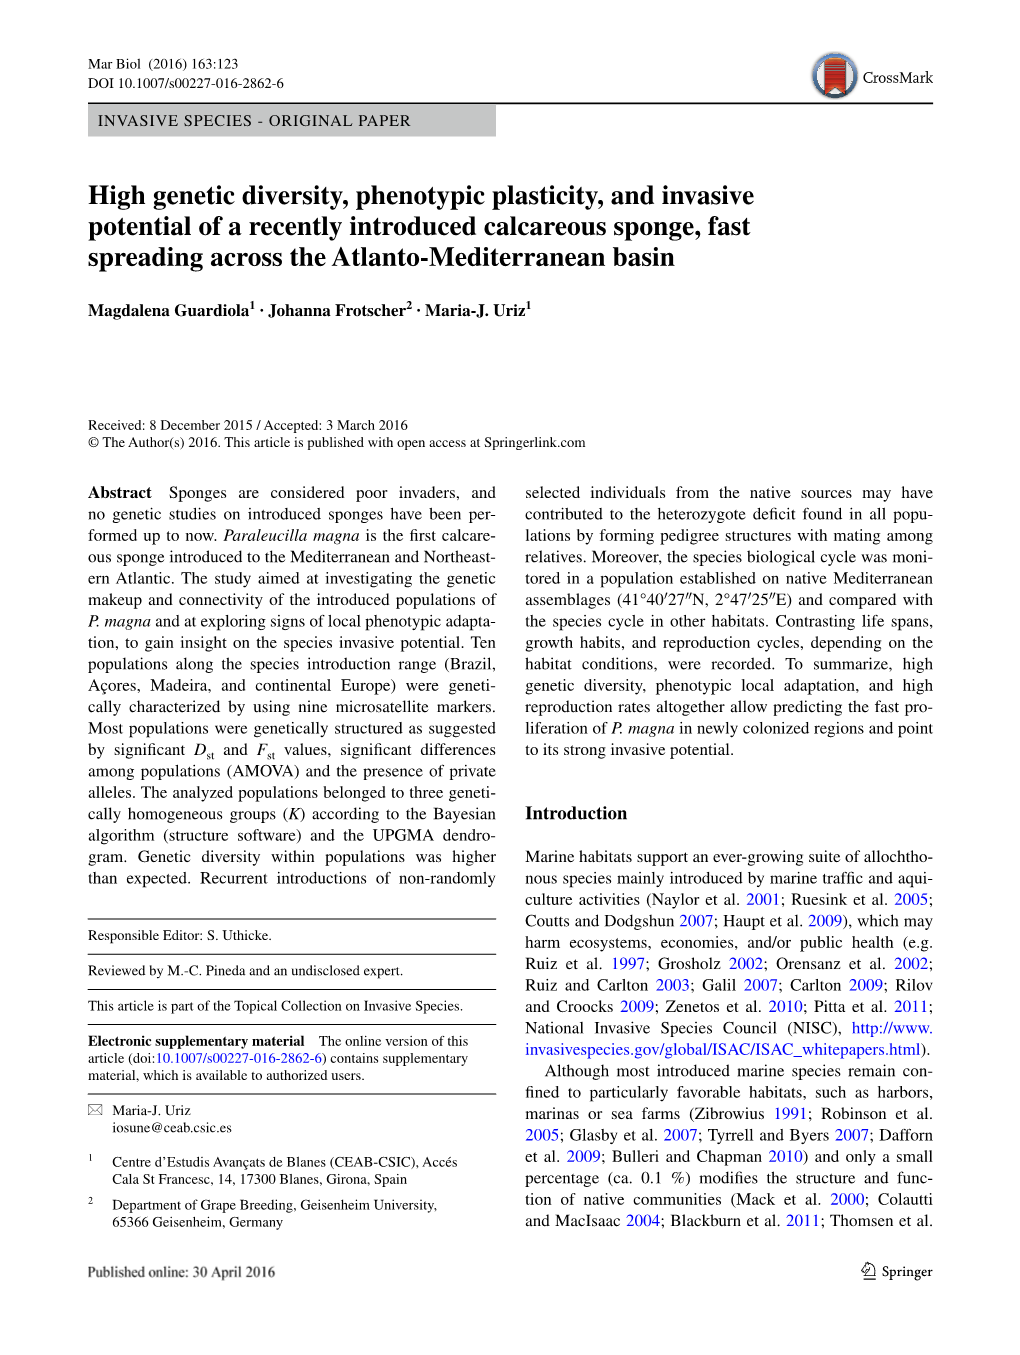 High Genetic Diversity, Phenotypic Plasticity, and Invasive Potential of A